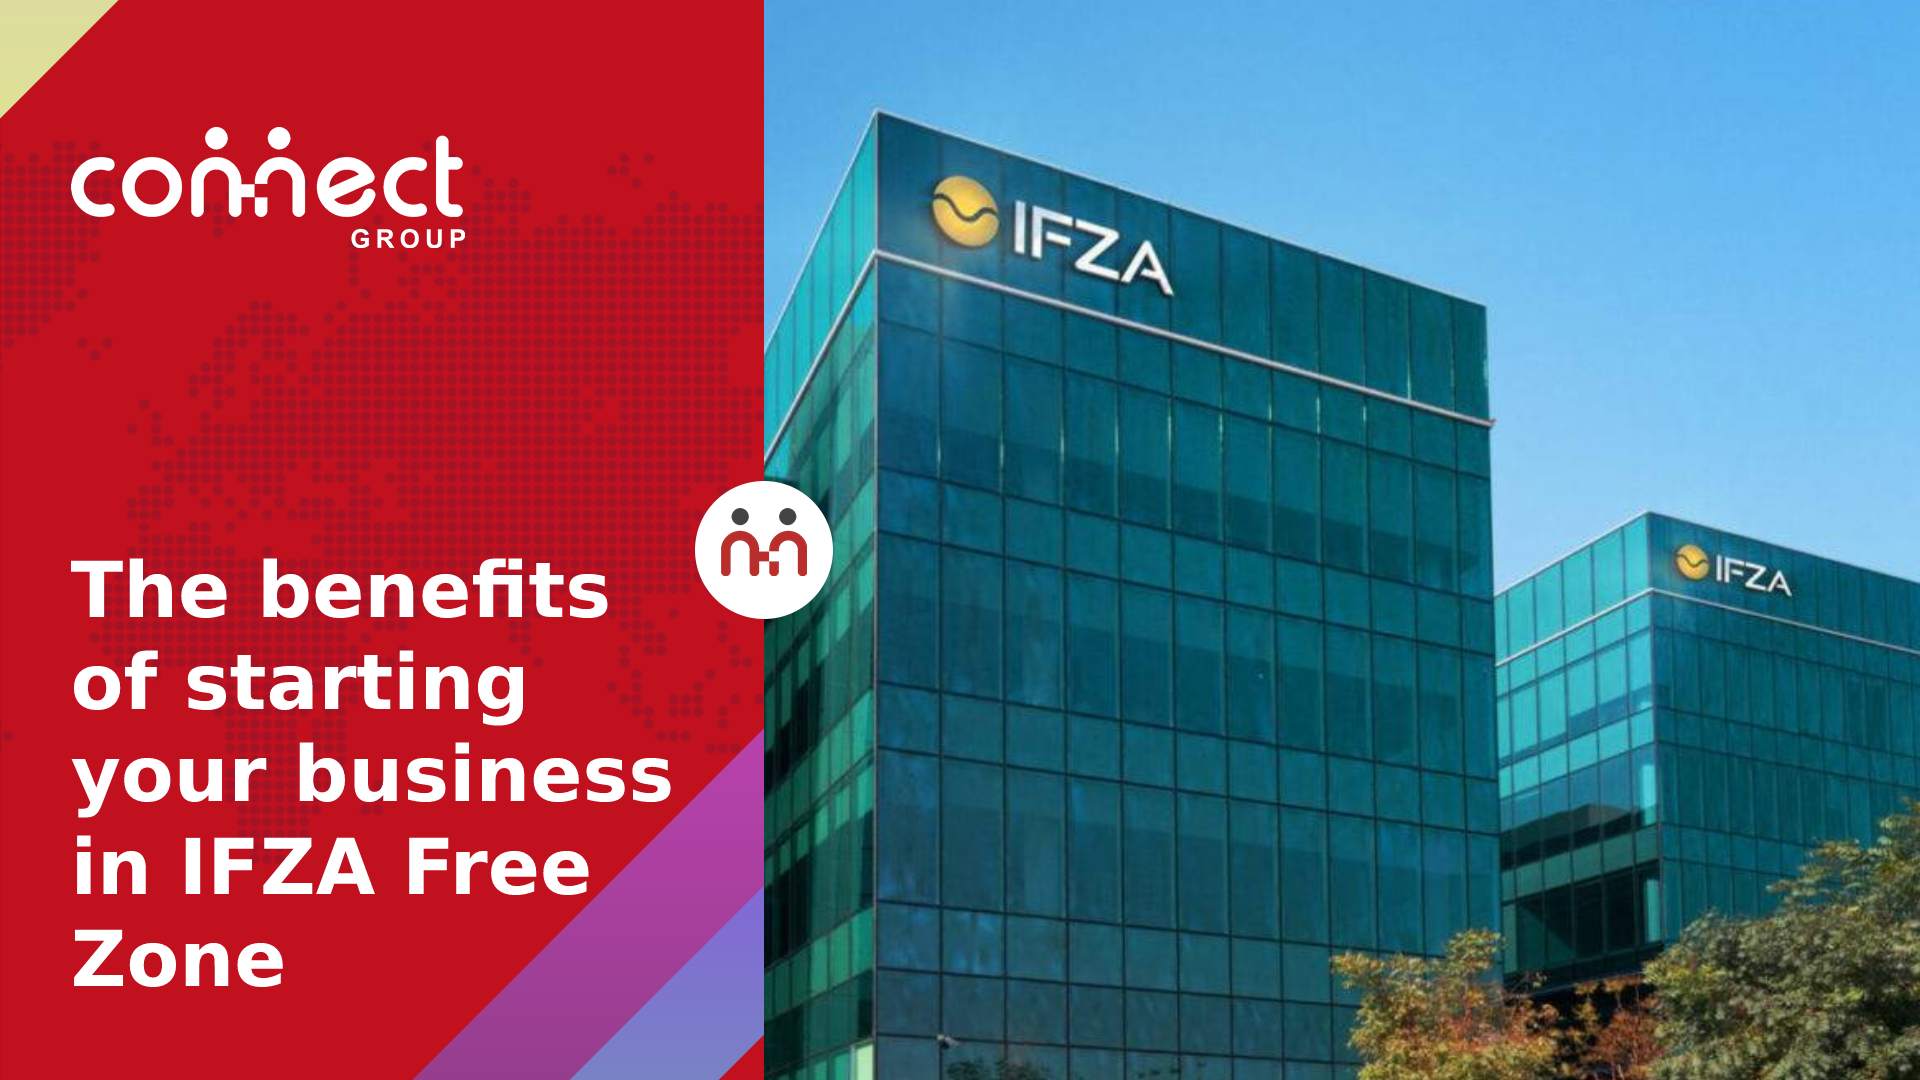 The benefits of starting your business in IFZA Free Zone